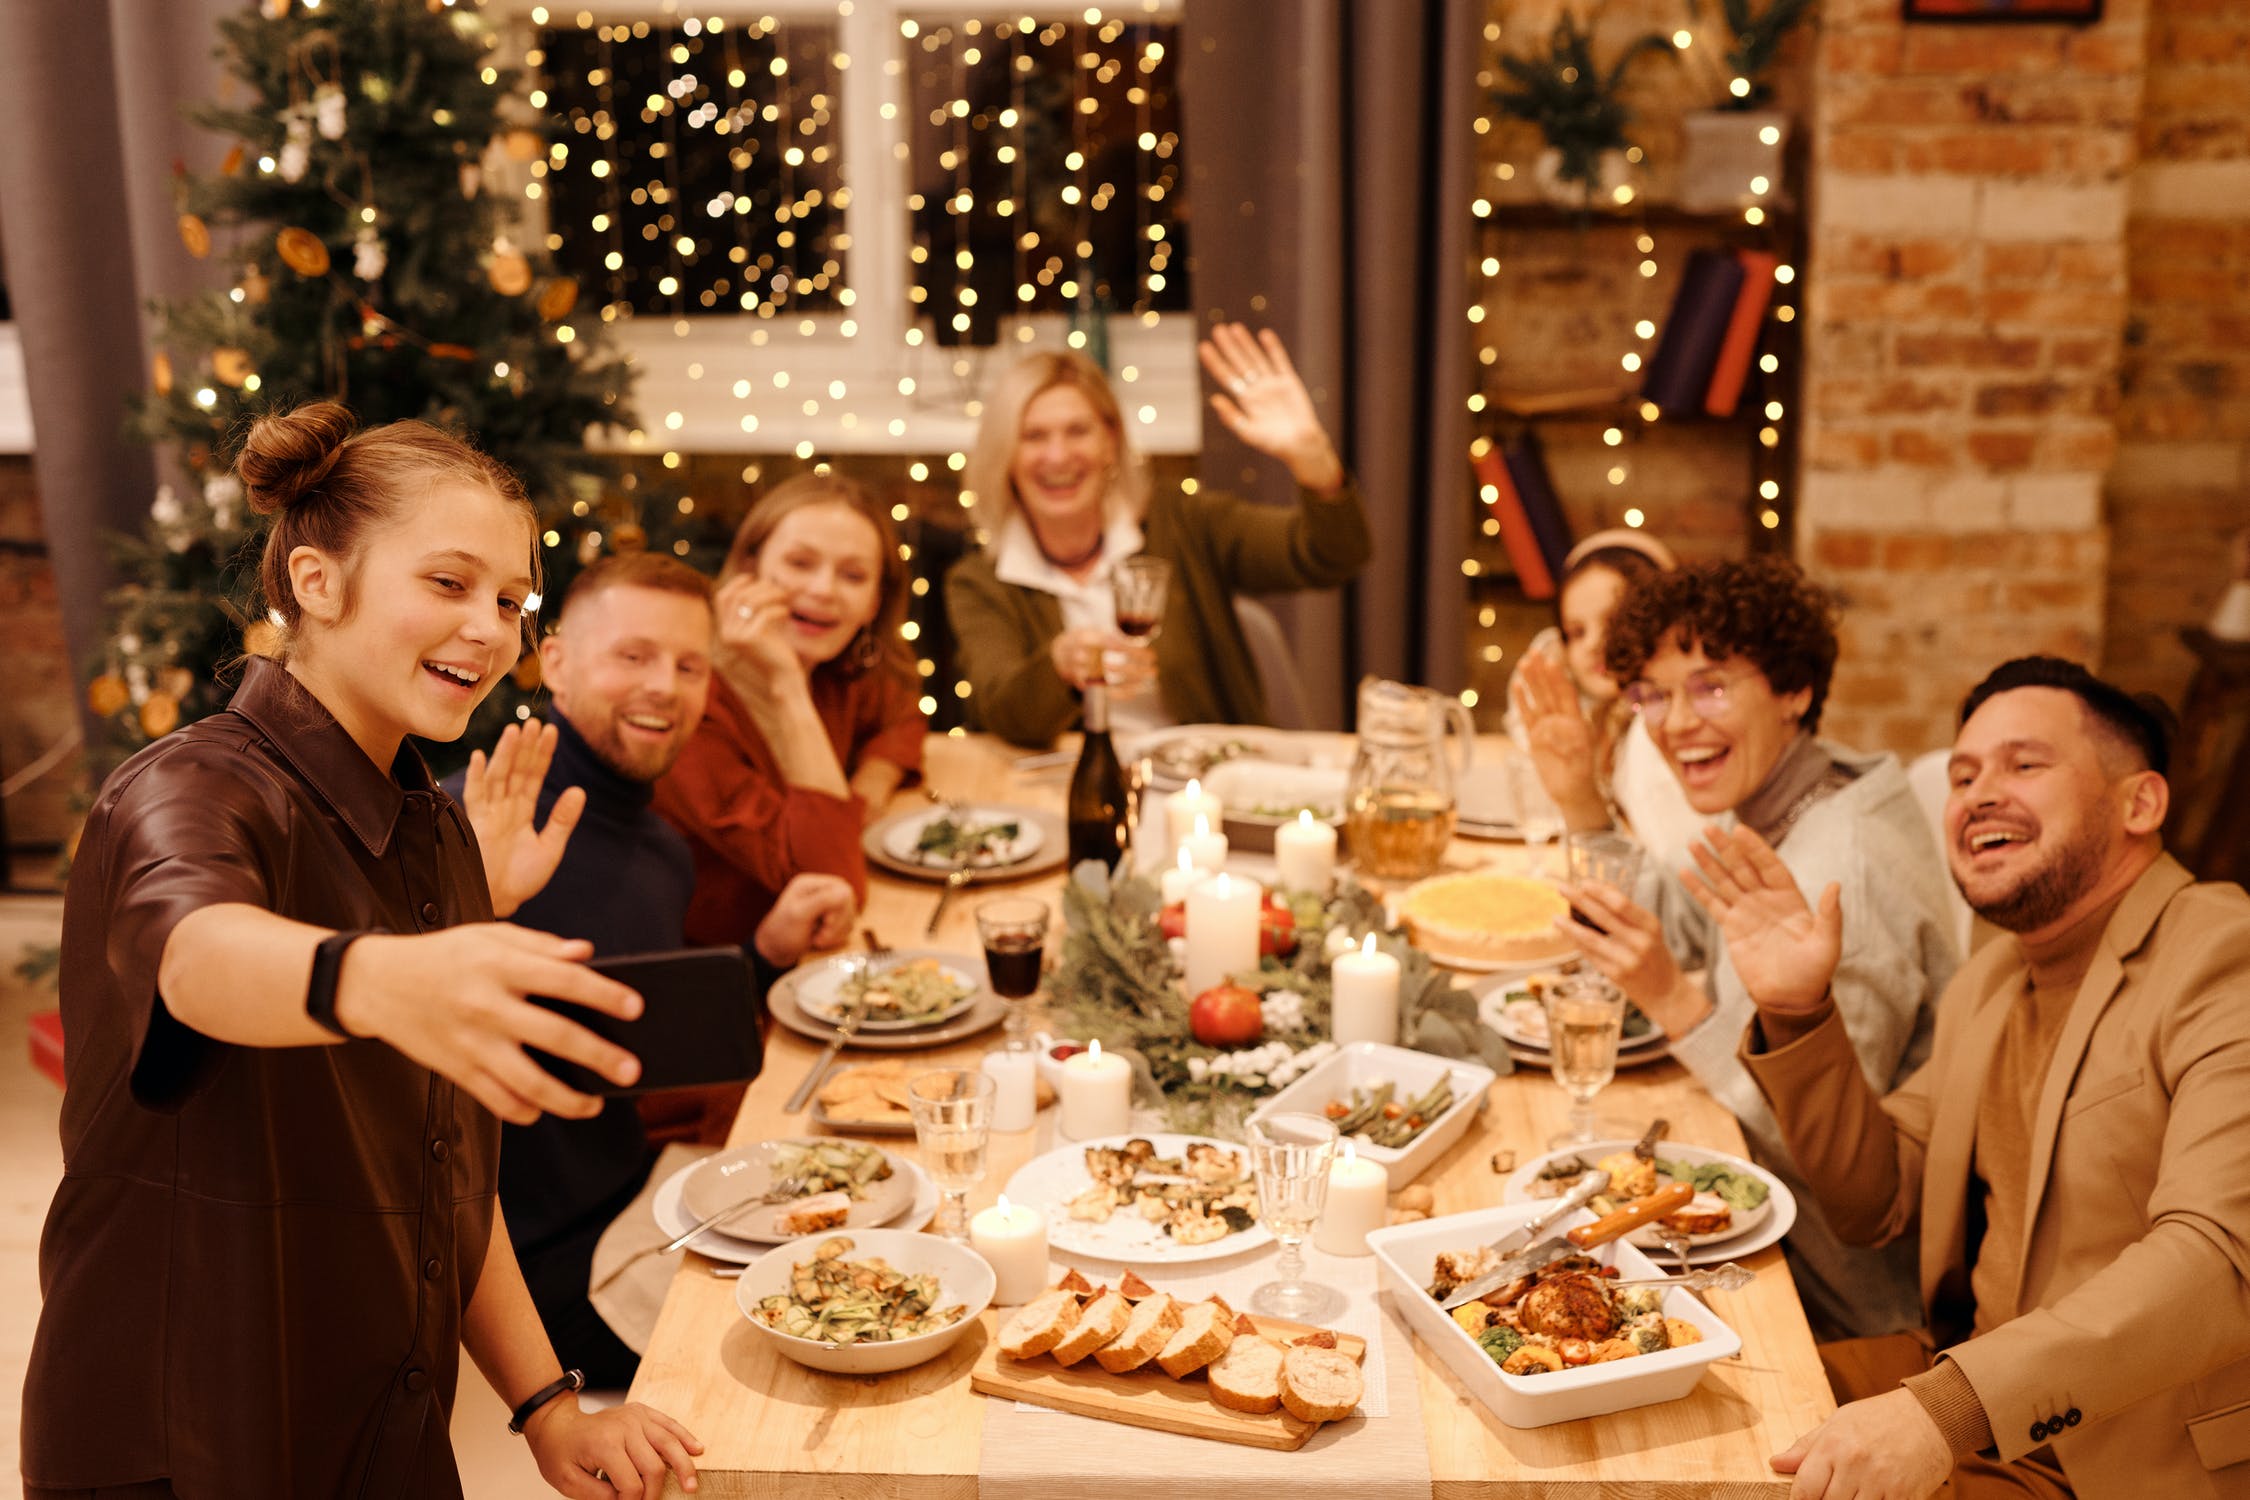 They had the most wonderful Christmas ever | Source: Pexels